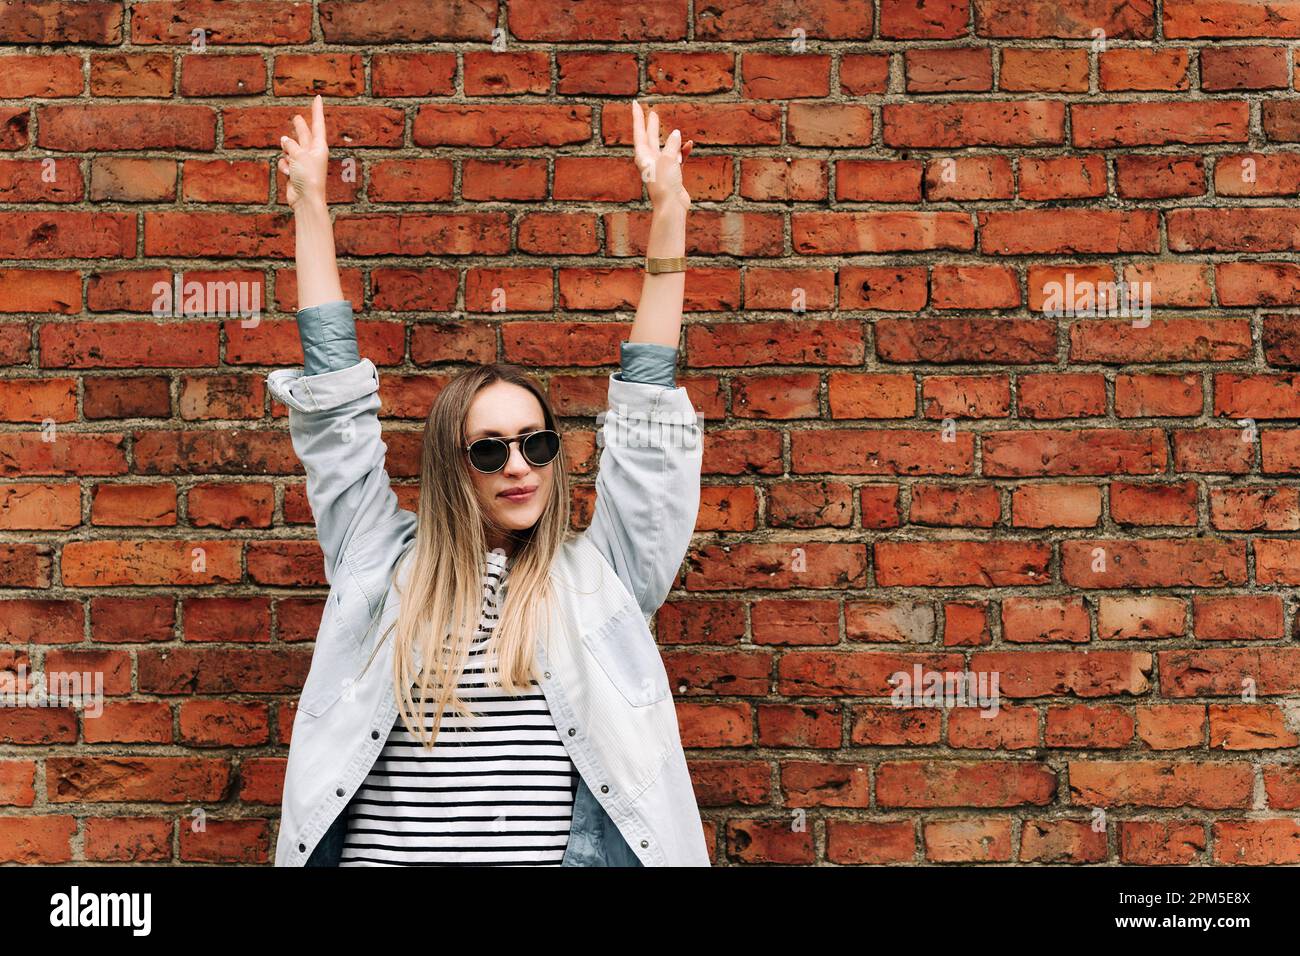 A woman in sunglasses with her hands raised against a brick wall Stock Photo